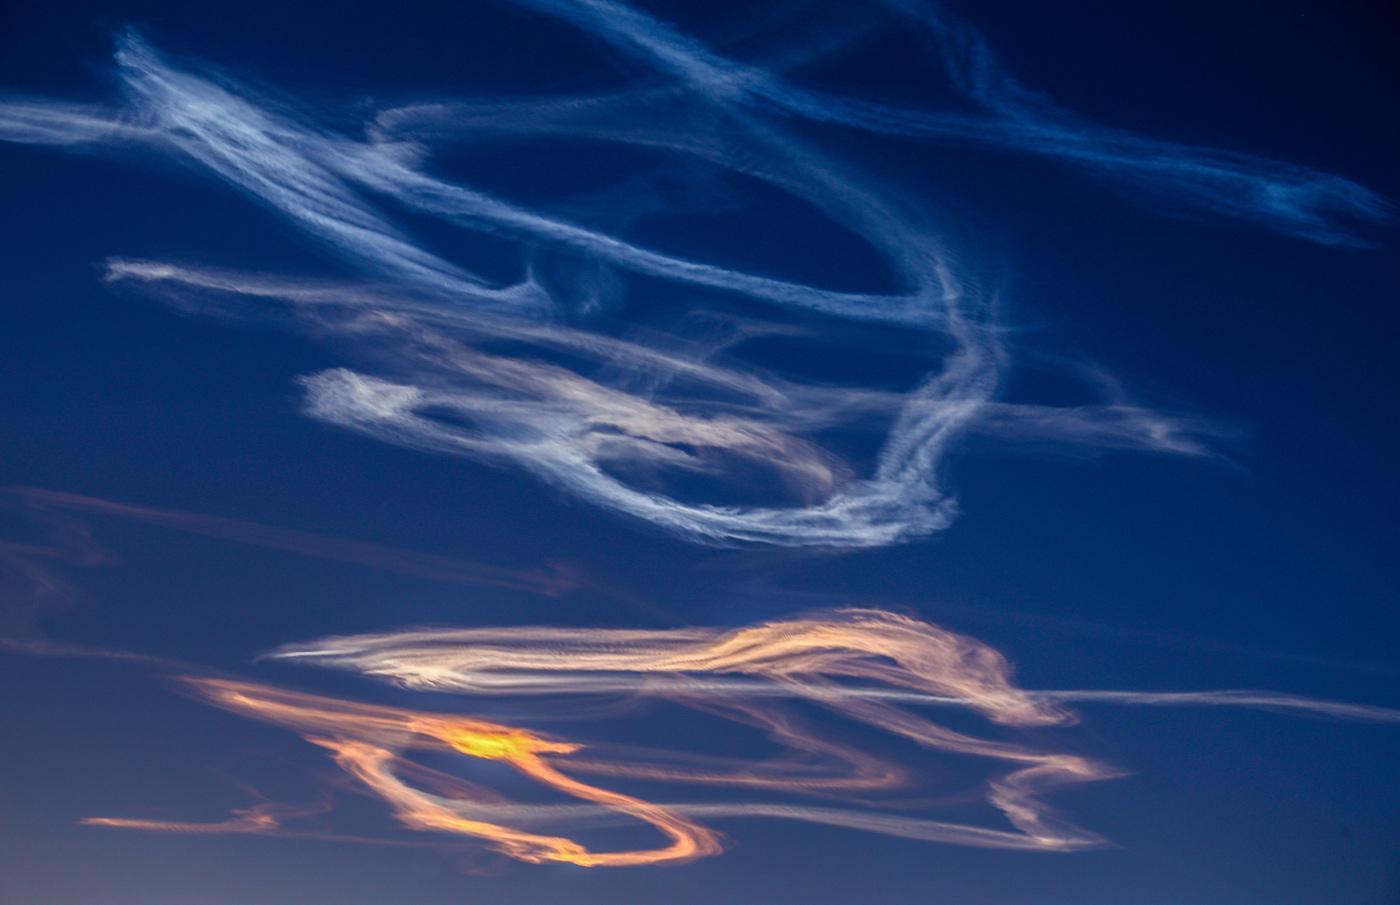 Trails in the sky that are remnants of a meteor entering Earth's atmosphere.